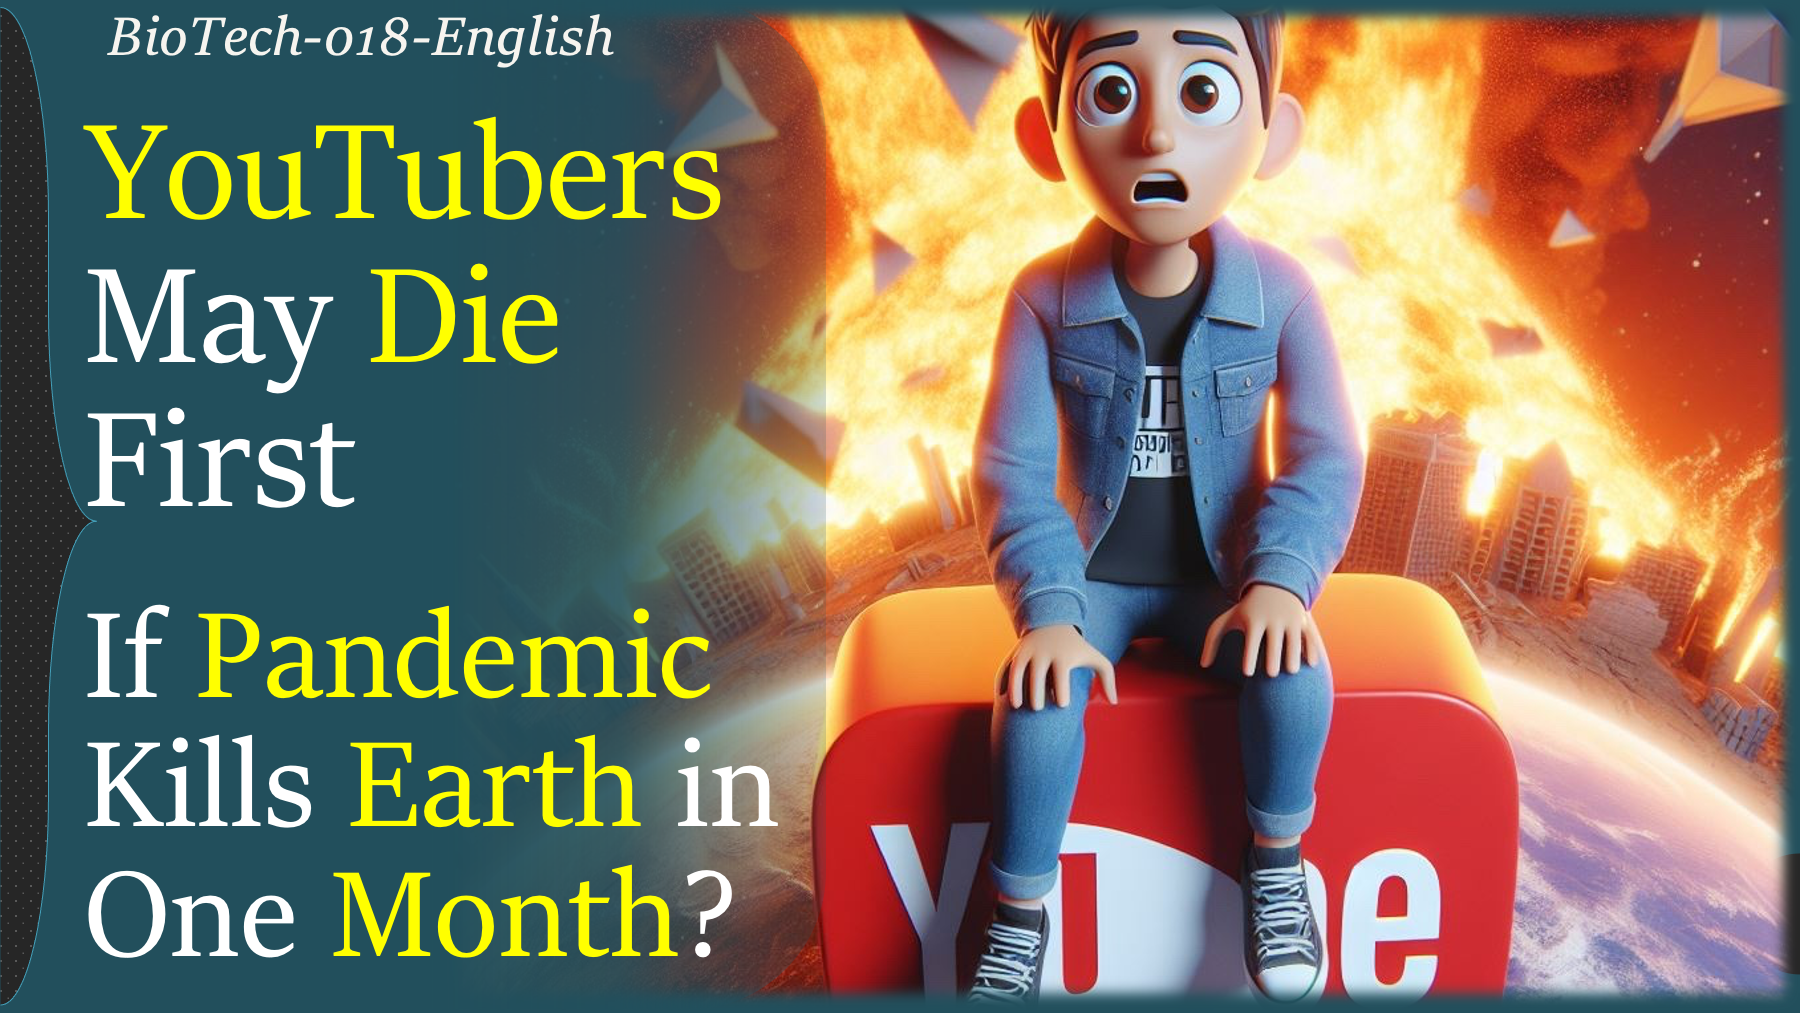 Who will die first if life on Earth demise in one month?